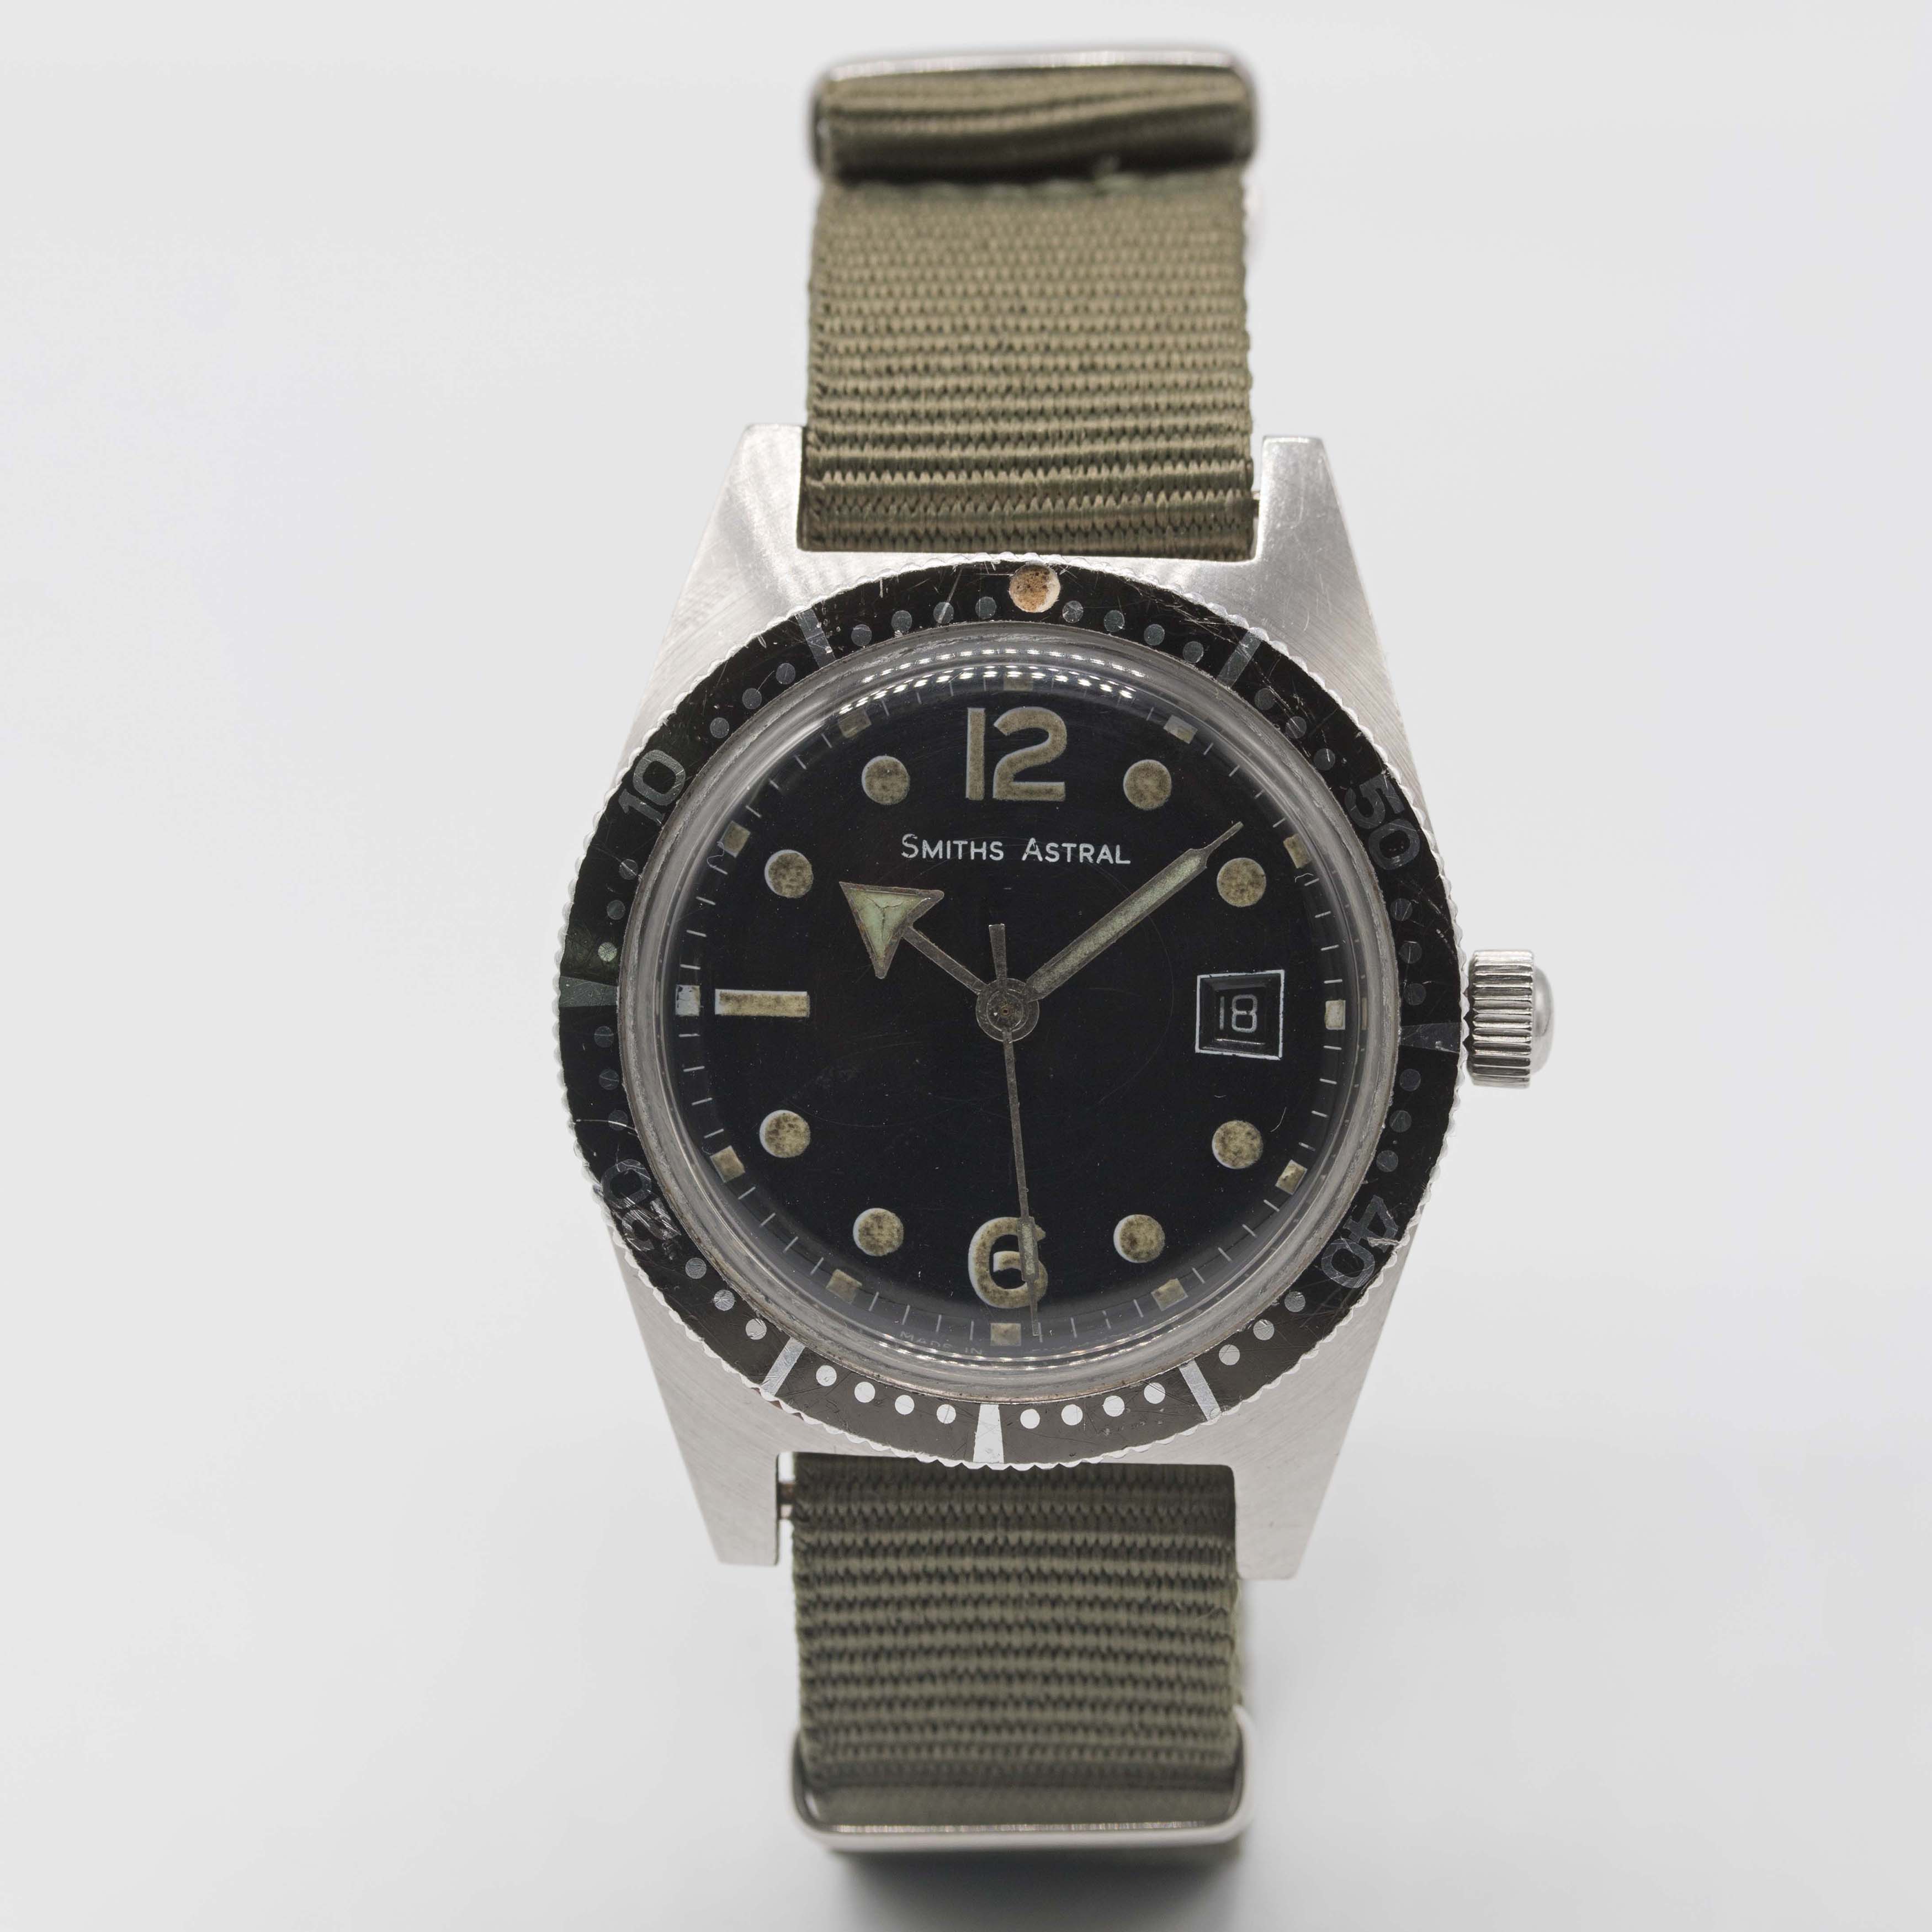 A GENTLEMAN'S STAINLESS STEEL SMITHS ASTRAL "SKIN DIVER" WRIST WATCH CIRCA 1969, REF. CM4501 WITH - Image 2 of 10